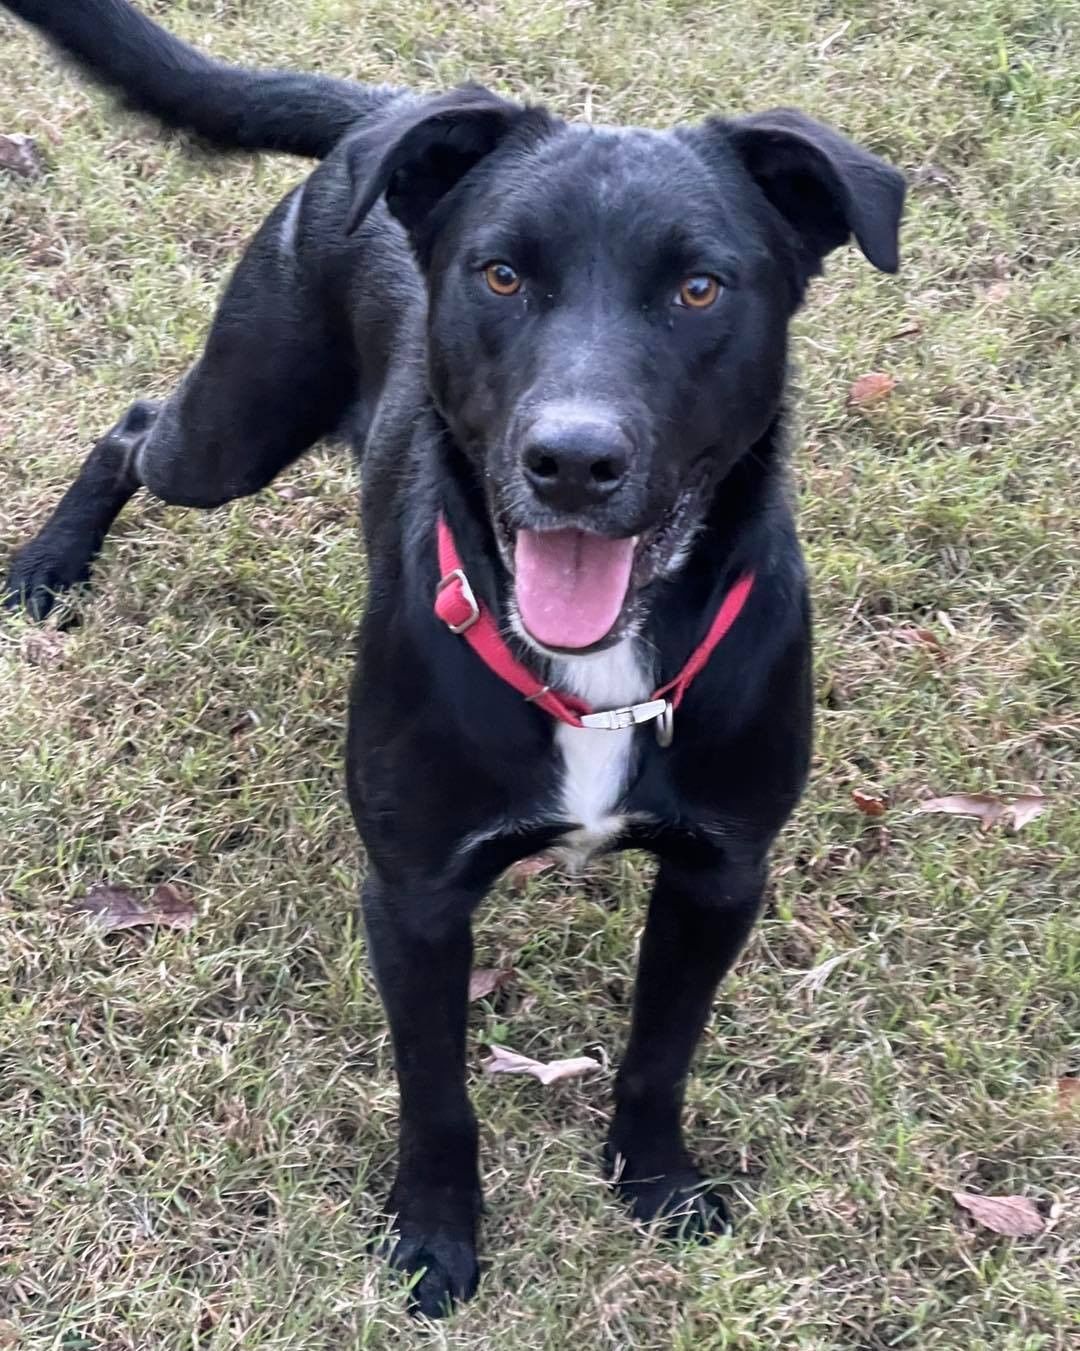 🚨 FOSTER // FOSTER-TO-ADOPTER // ADOPTER NEEDED! 🚨 
 
Andy has made it to Massachusetts but has no place to stay. 😔 This sweet guy is about 2 years old and 54lbs. He can be a bit on the shy side, but once he warms up he loves to play + and will seek affection. 

Here’s what he’s looking for:
 
🐶 Preferably another playful dog
🧒 Kids 5+
😼 Confident/dog savvy cats 
🏃 Active people to play and hangout with
☀️ People who are home during the day
 
Please help us find Andy a foster (or an adopter!) by sharing this post and tagging your dog-loving friends.
 
For more information on fostering please visit www.browndogcoalition.com/foster

<a target='_blank' href='https://www.instagram.com/explore/tags/adoptme/'>#adoptme</a> <a target='_blank' href='https://www.instagram.com/explore/tags/fosterme/'>#fosterme</a> <a target='_blank' href='https://www.instagram.com/explore/tags/adoptabledogsofinstagram/'>#adoptabledogsofinstagram</a> <a target='_blank' href='https://www.instagram.com/explore/tags/dogsofnewengland/'>#dogsofnewengland</a> <a target='_blank' href='https://www.instagram.com/explore/tags/dogsofmassachusetts/'>#dogsofmassachusetts</a> <a target='_blank' href='https://www.instagram.com/explore/tags/browndog/'>#browndog</a>